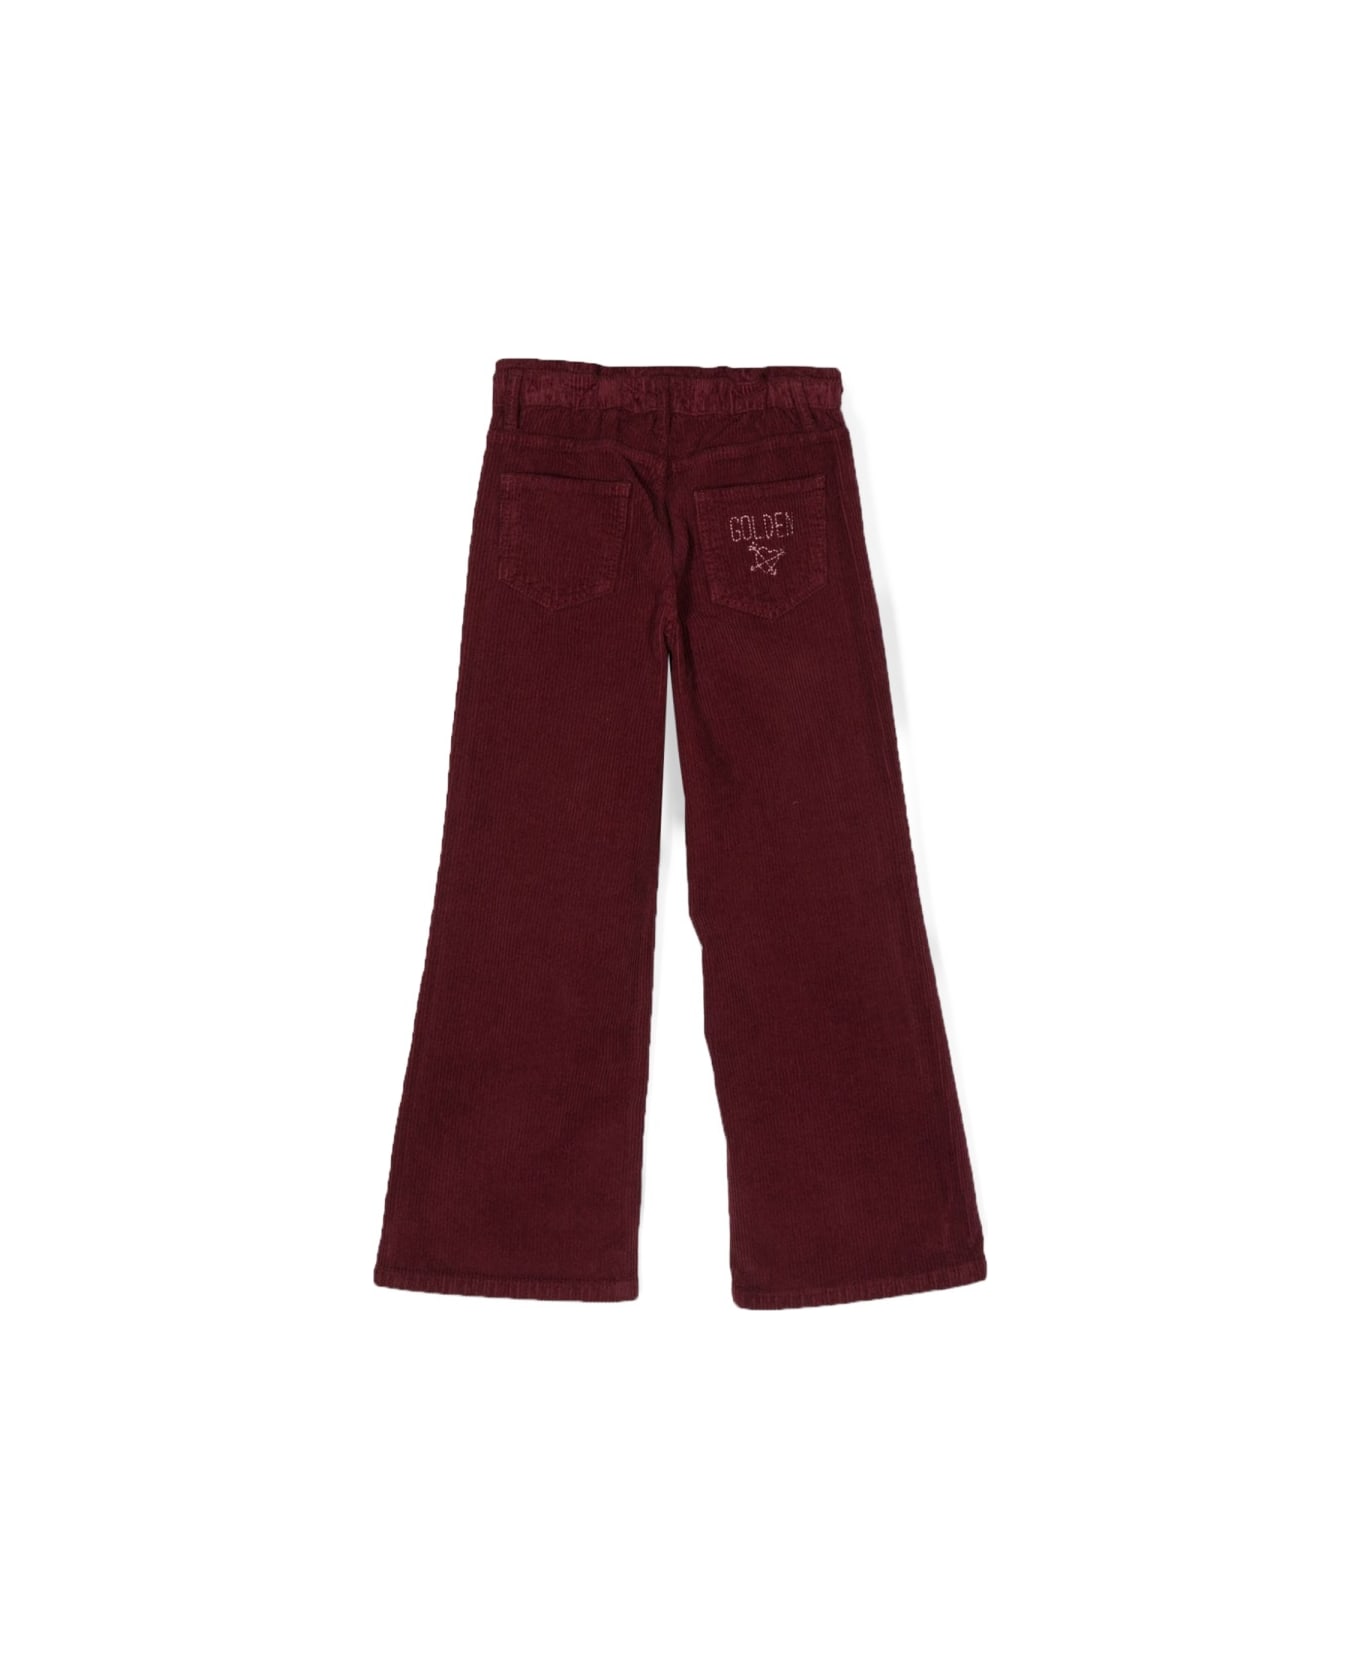 Golden Goose Wide Leg Pants With Embroidery - BORDEAUX ボトムス